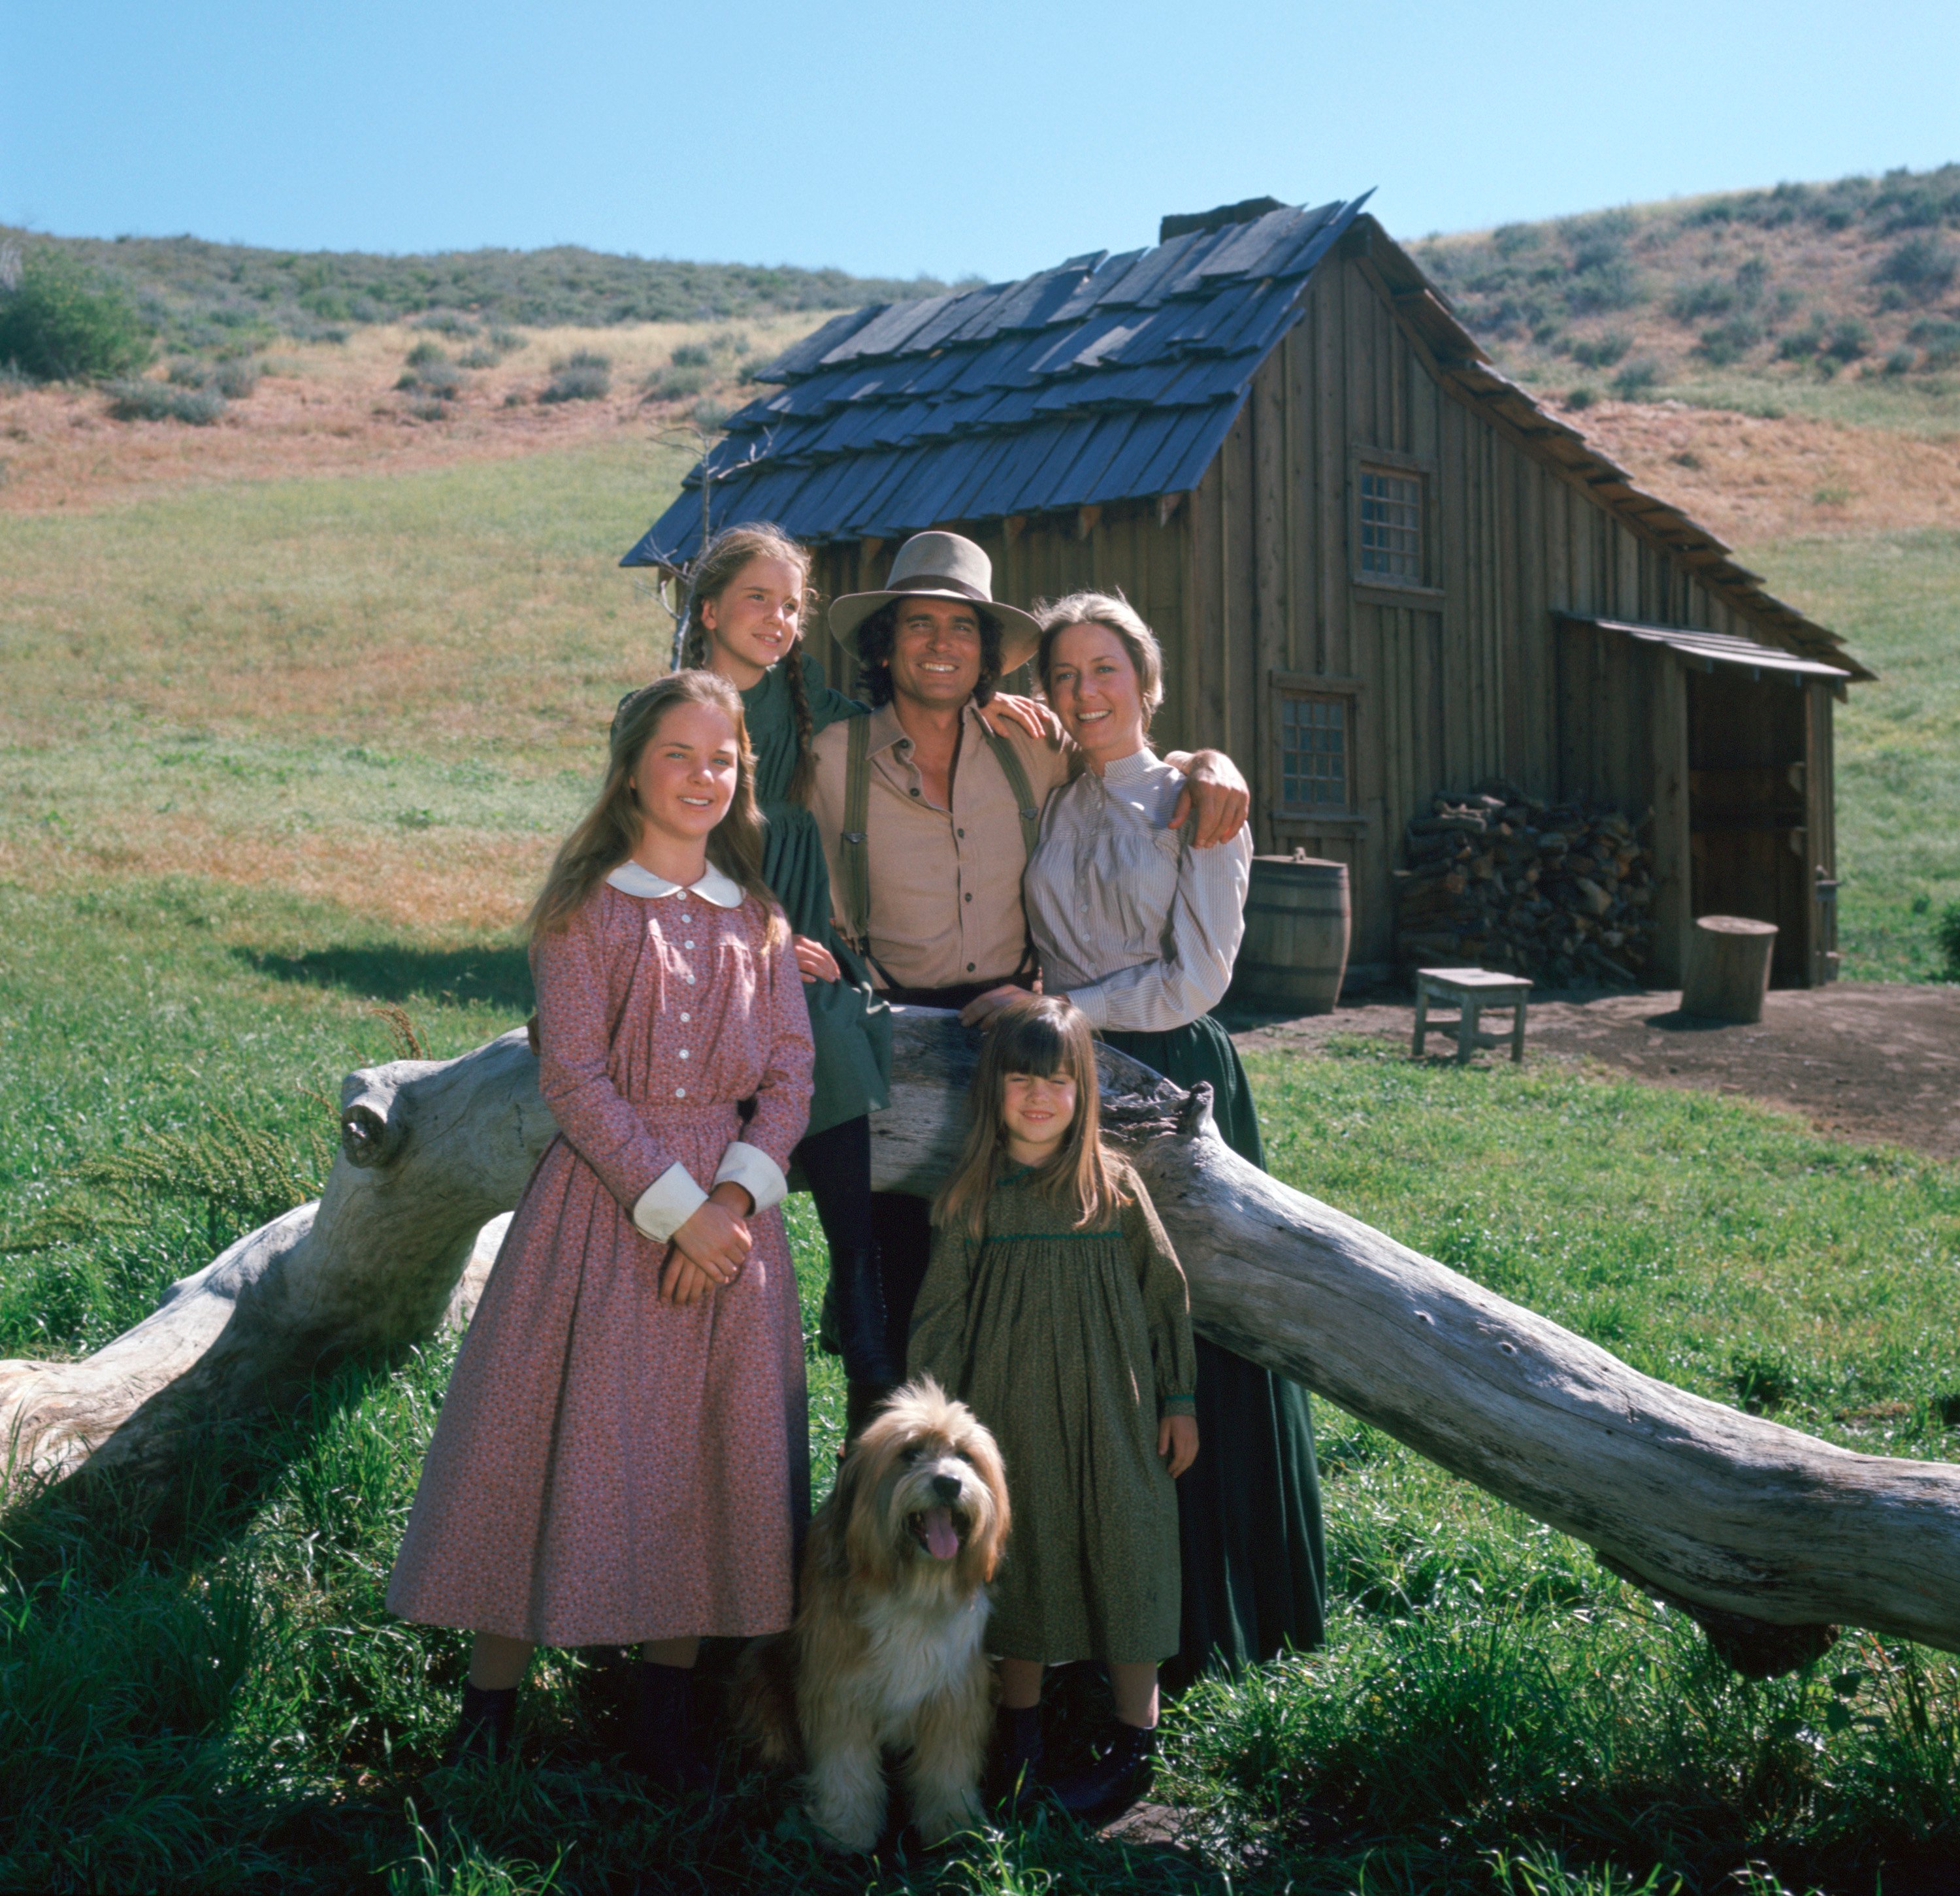  (clockwise from top left) Melissa Gilbert as Laura Ingalls, Michael Landon as Charles Philip Ingalls, Karen Grassle as Caroline Ingalls, Lindsay/Sidney Greenbush as Carrie Ingalls, and Melissa Sue Anderson as Mary Ingalls 